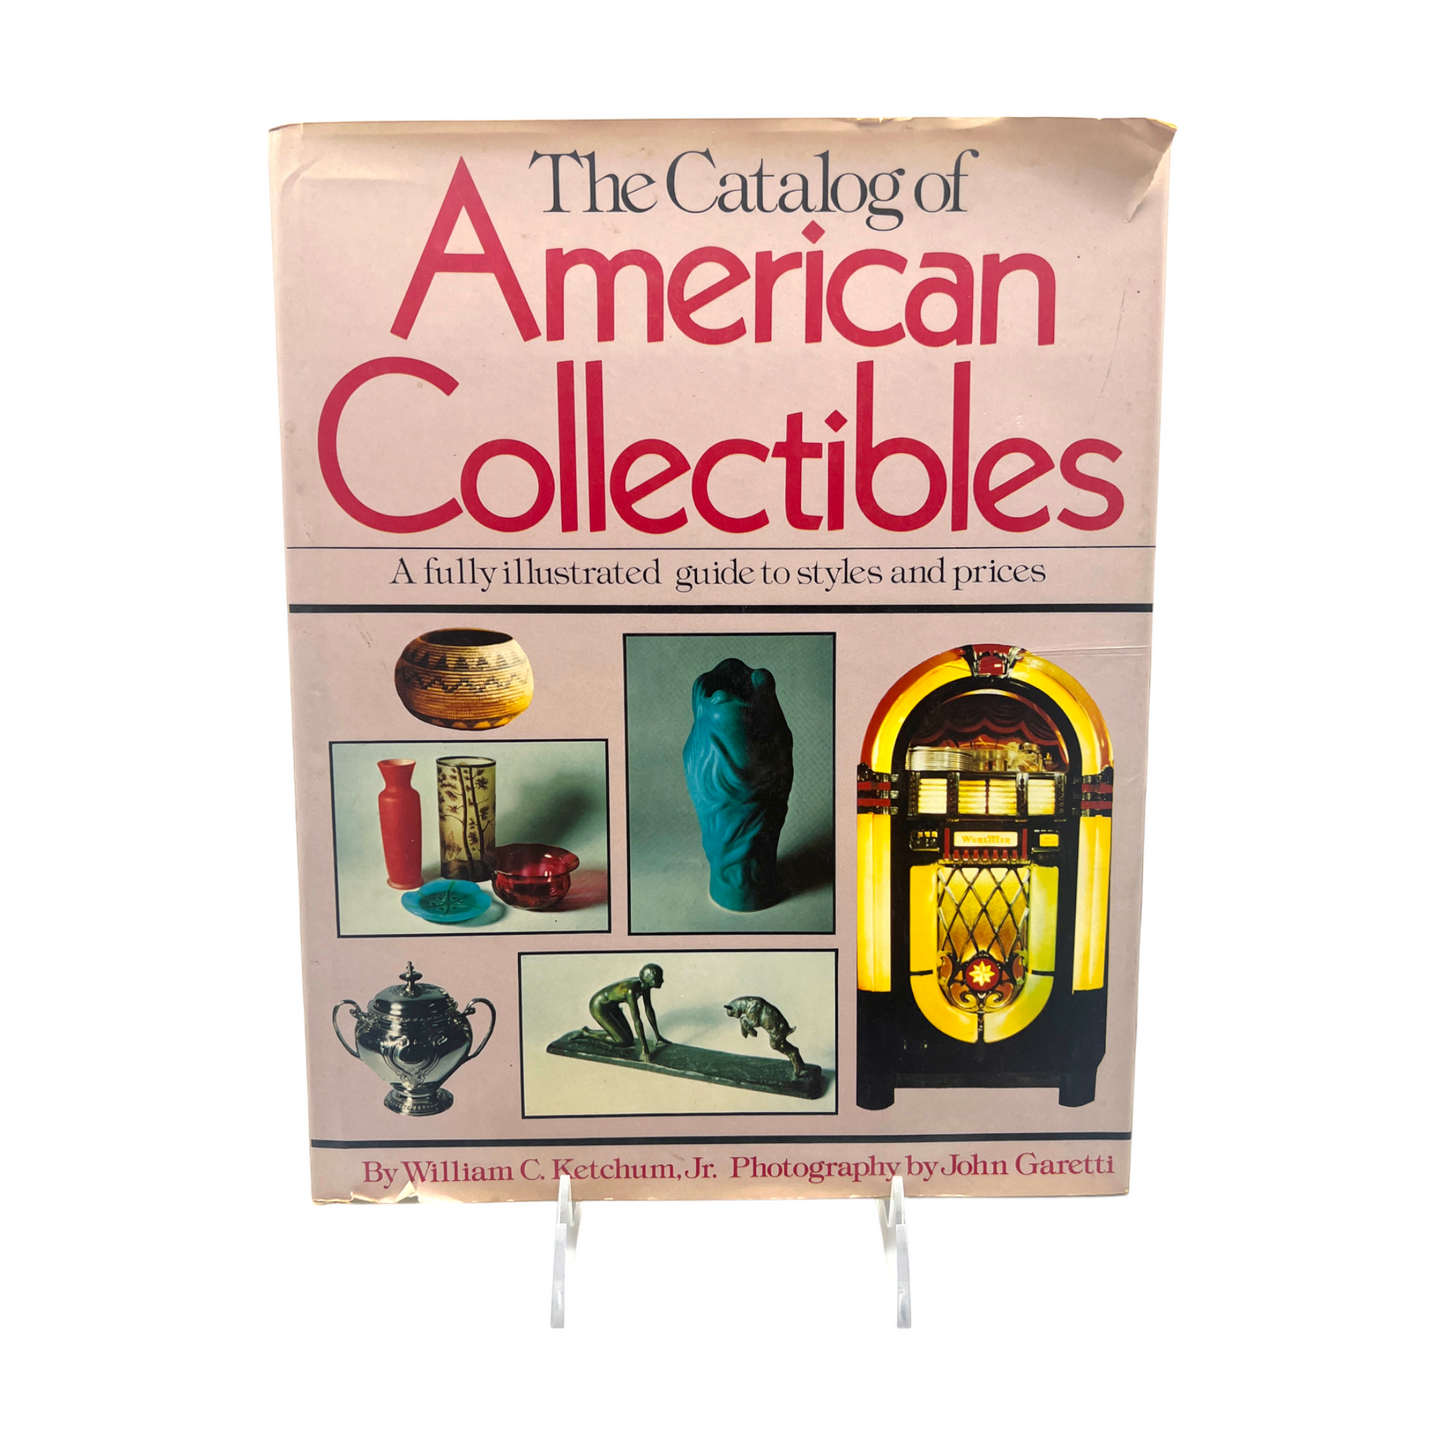 The Catalog Of American Collectibles - Reference Book - Price Guide  By William C Ketchum Jr.